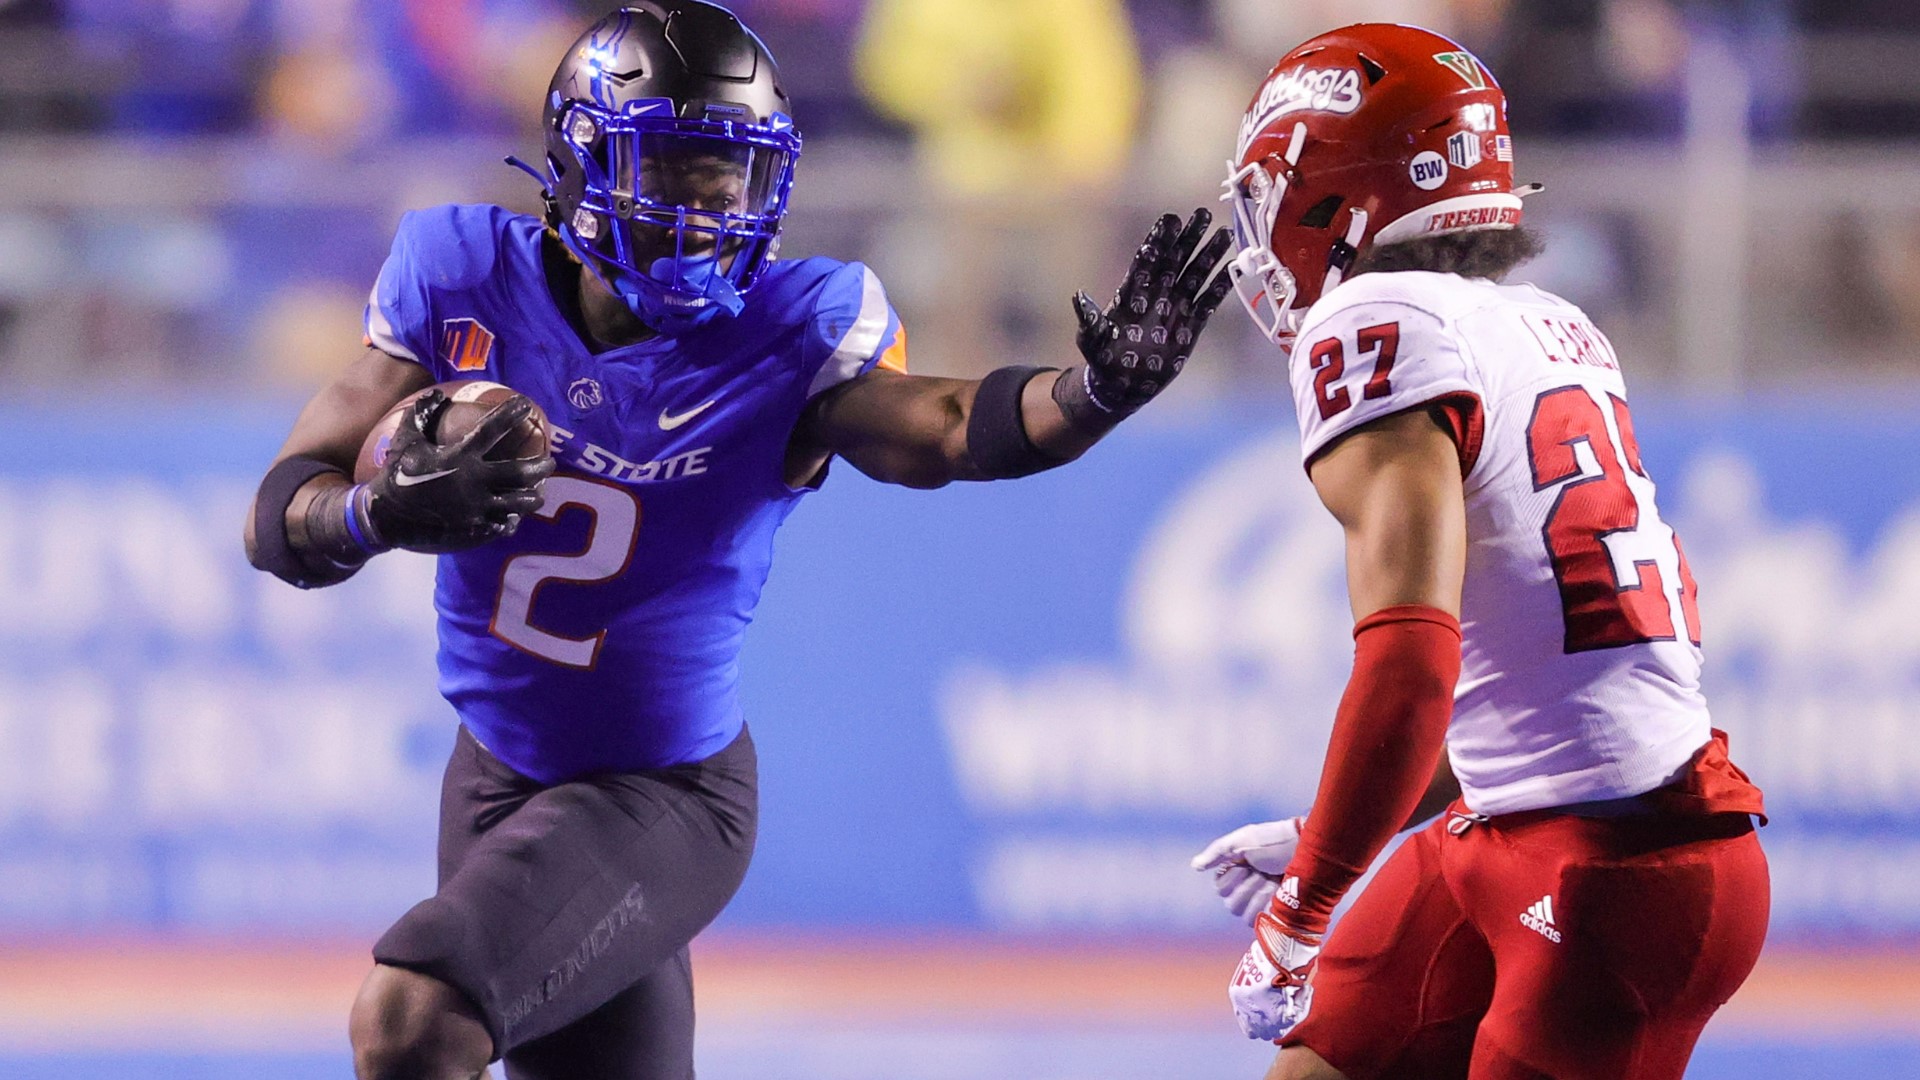 Mountain West Championship preview: Boise State vs. Fresno State 